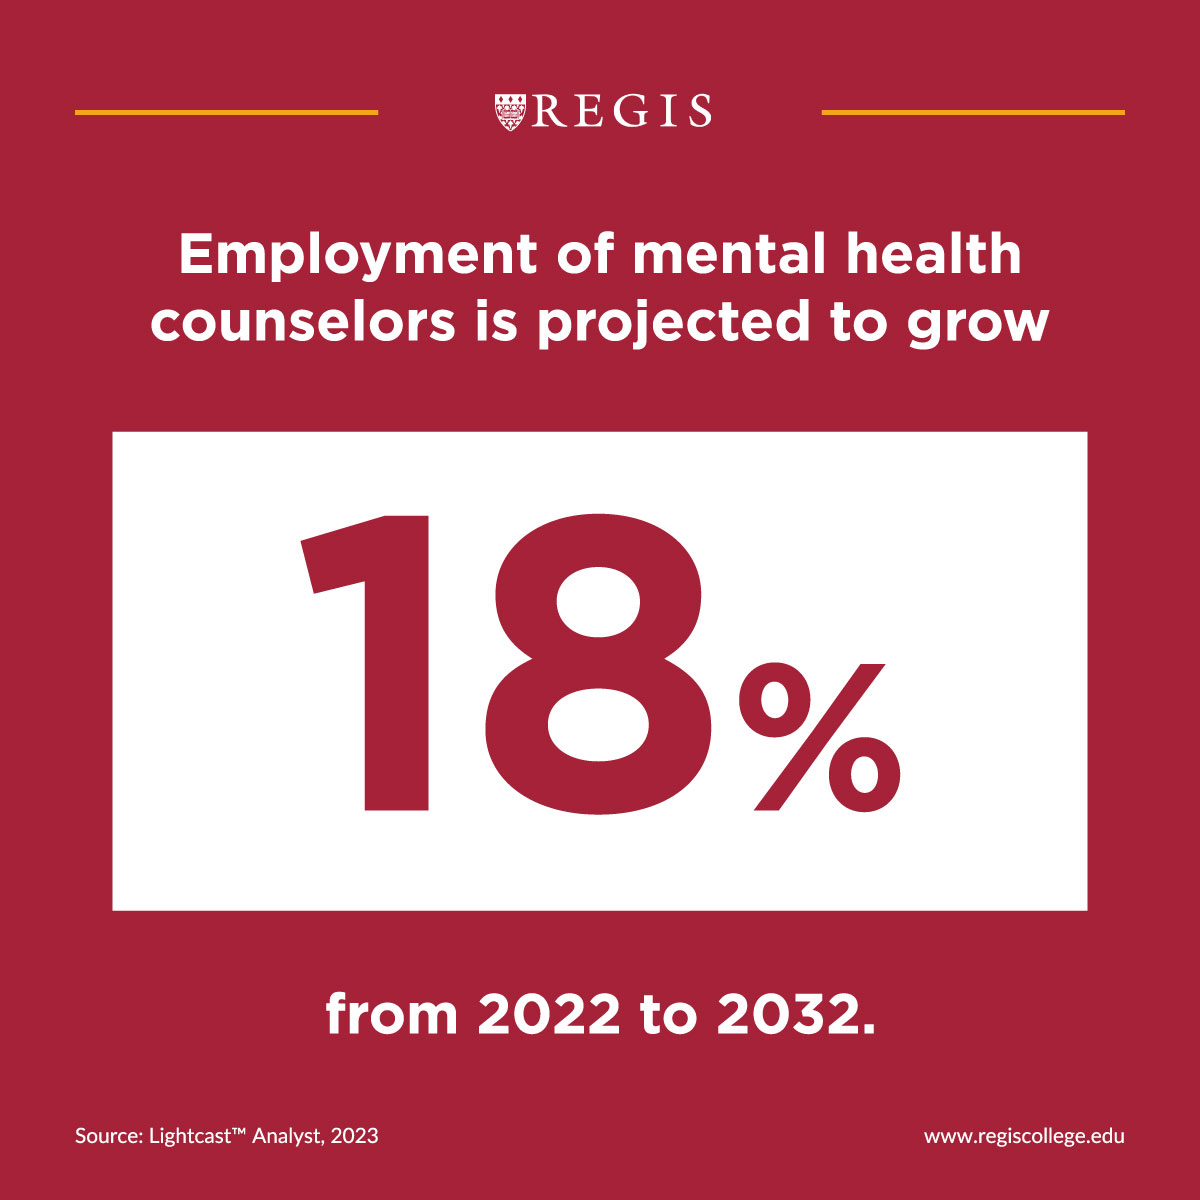 Employment of mental health counselors is projected to grow 18%